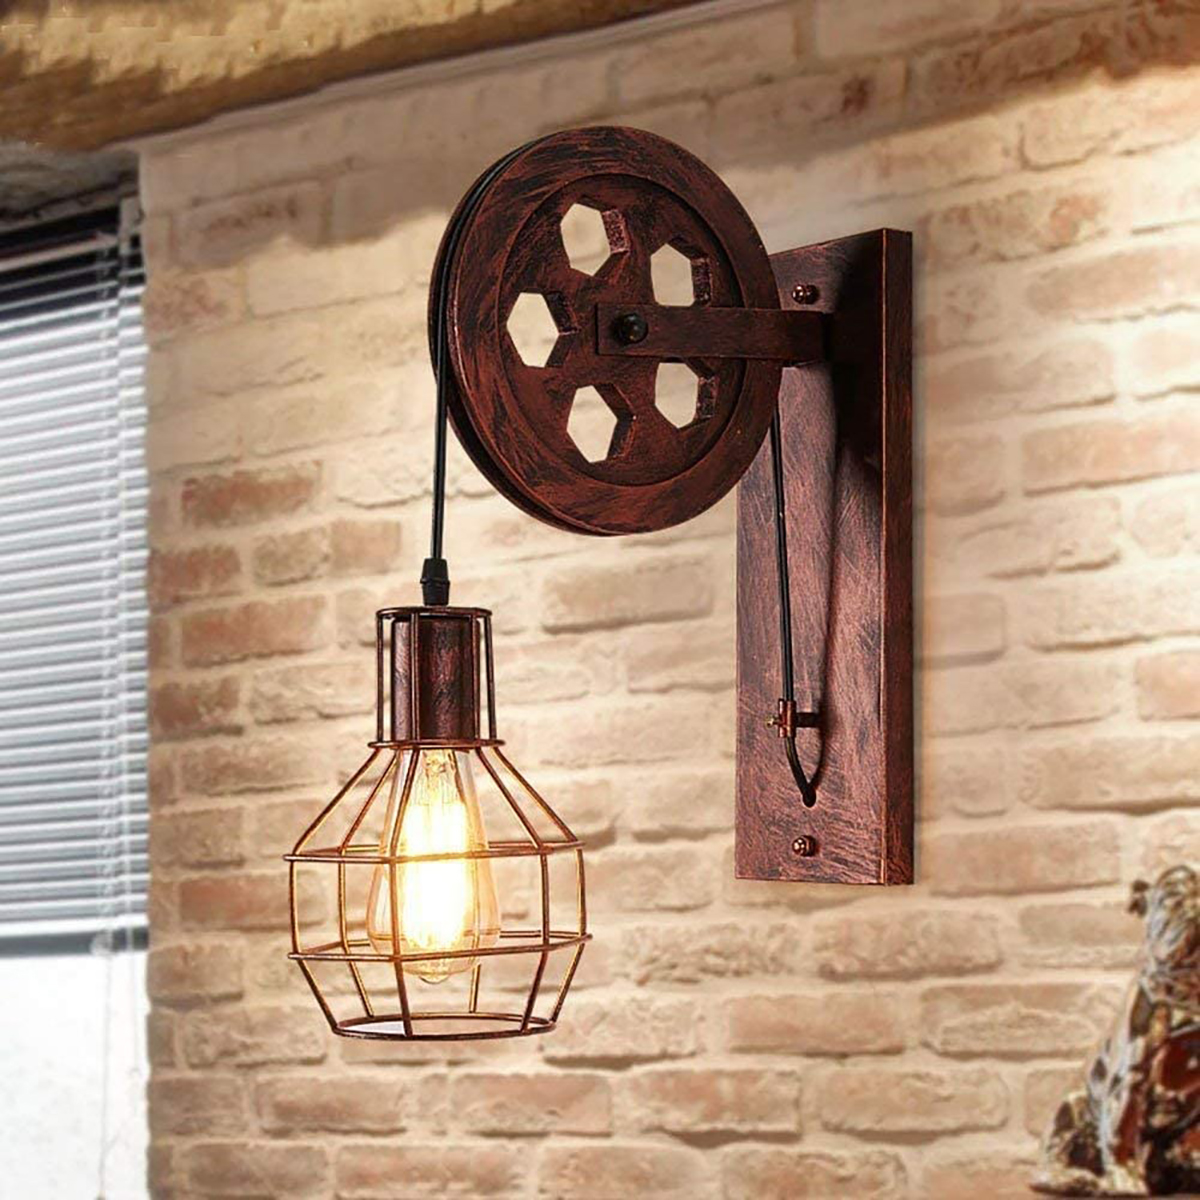 Adjustable-Retro-Iron-Wall-Lamp-Lifting-Pulley-E27-Sconce-Light-Indoor-4-Color-Without-Light-Bulb-1709520-1